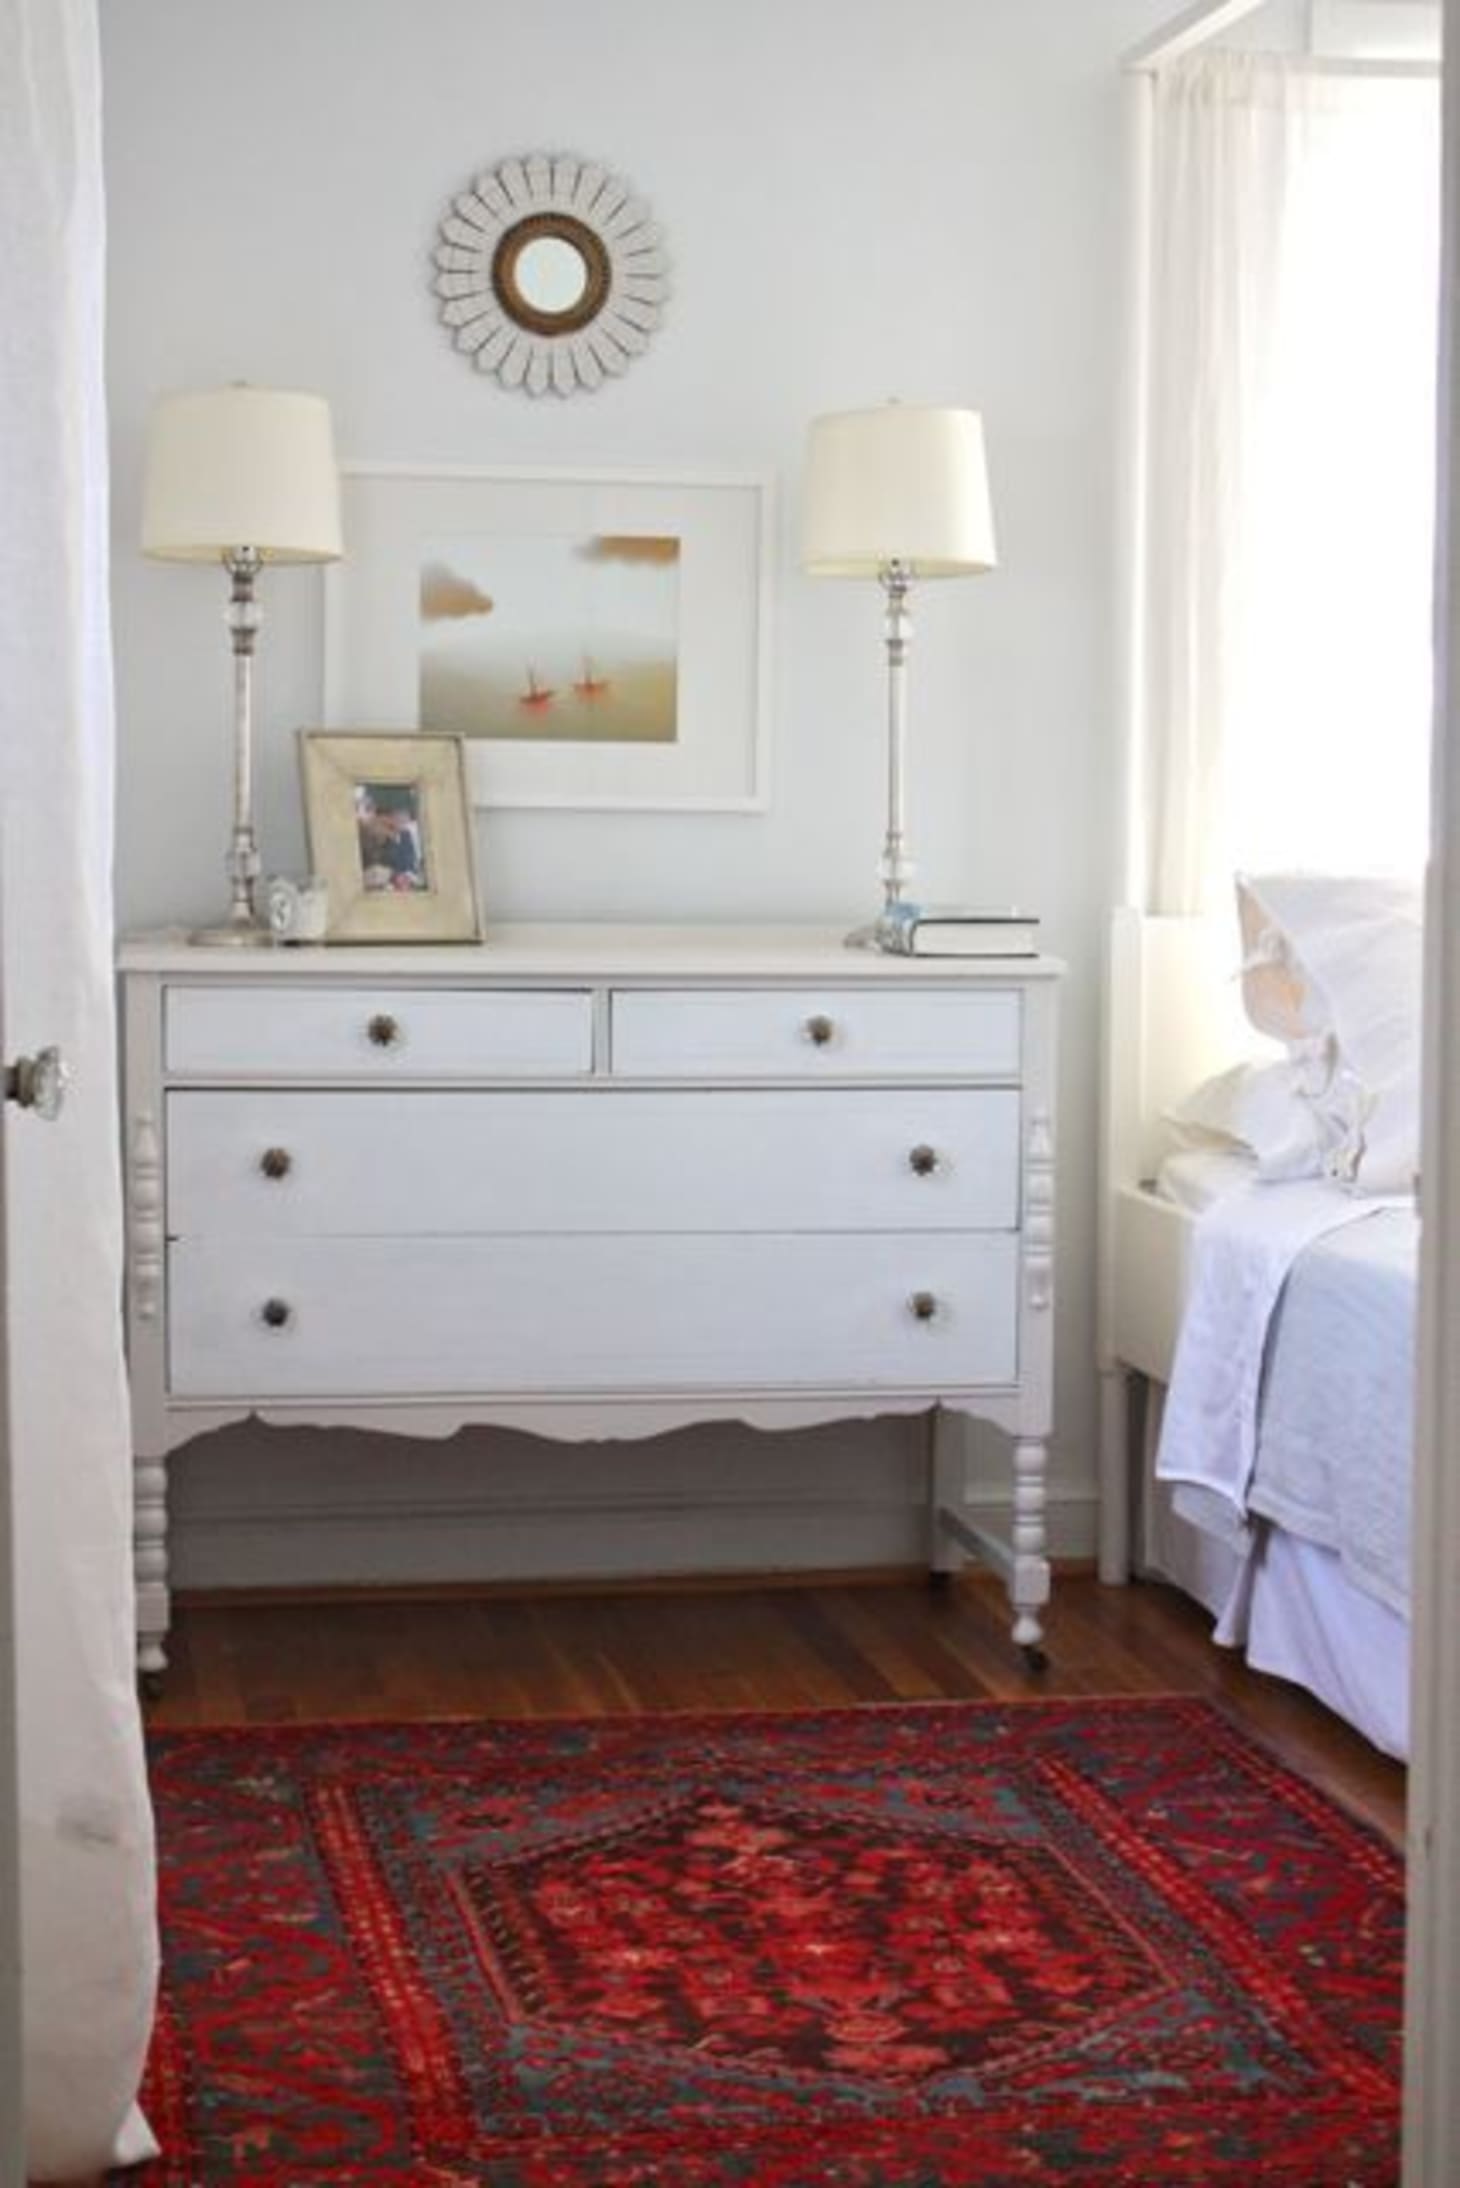 How To Style The Top Of A Dresser Dresser Decorating Ideas